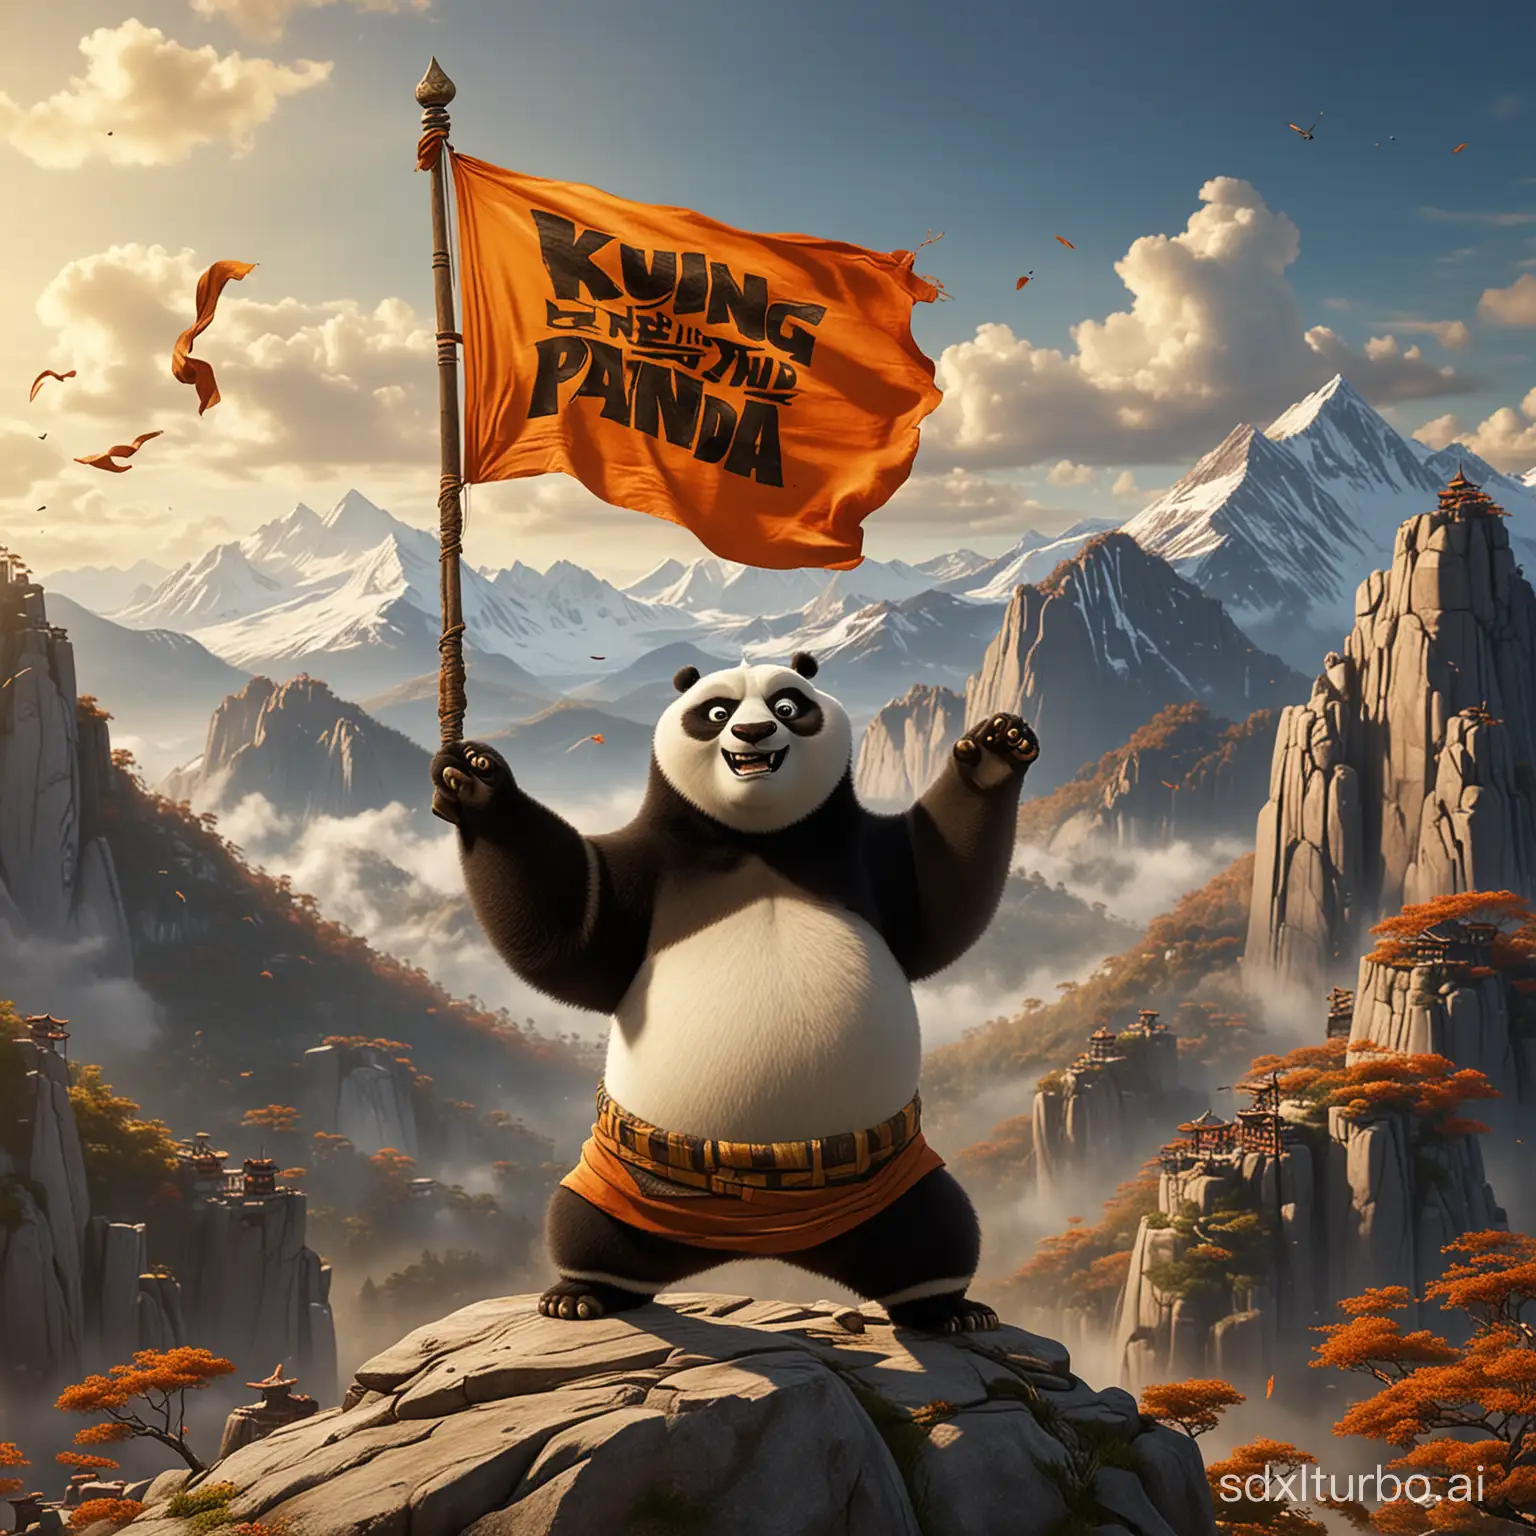 Kung-Fu-Panda-Triumphs-atop-Mountain-with-Victory-Banner